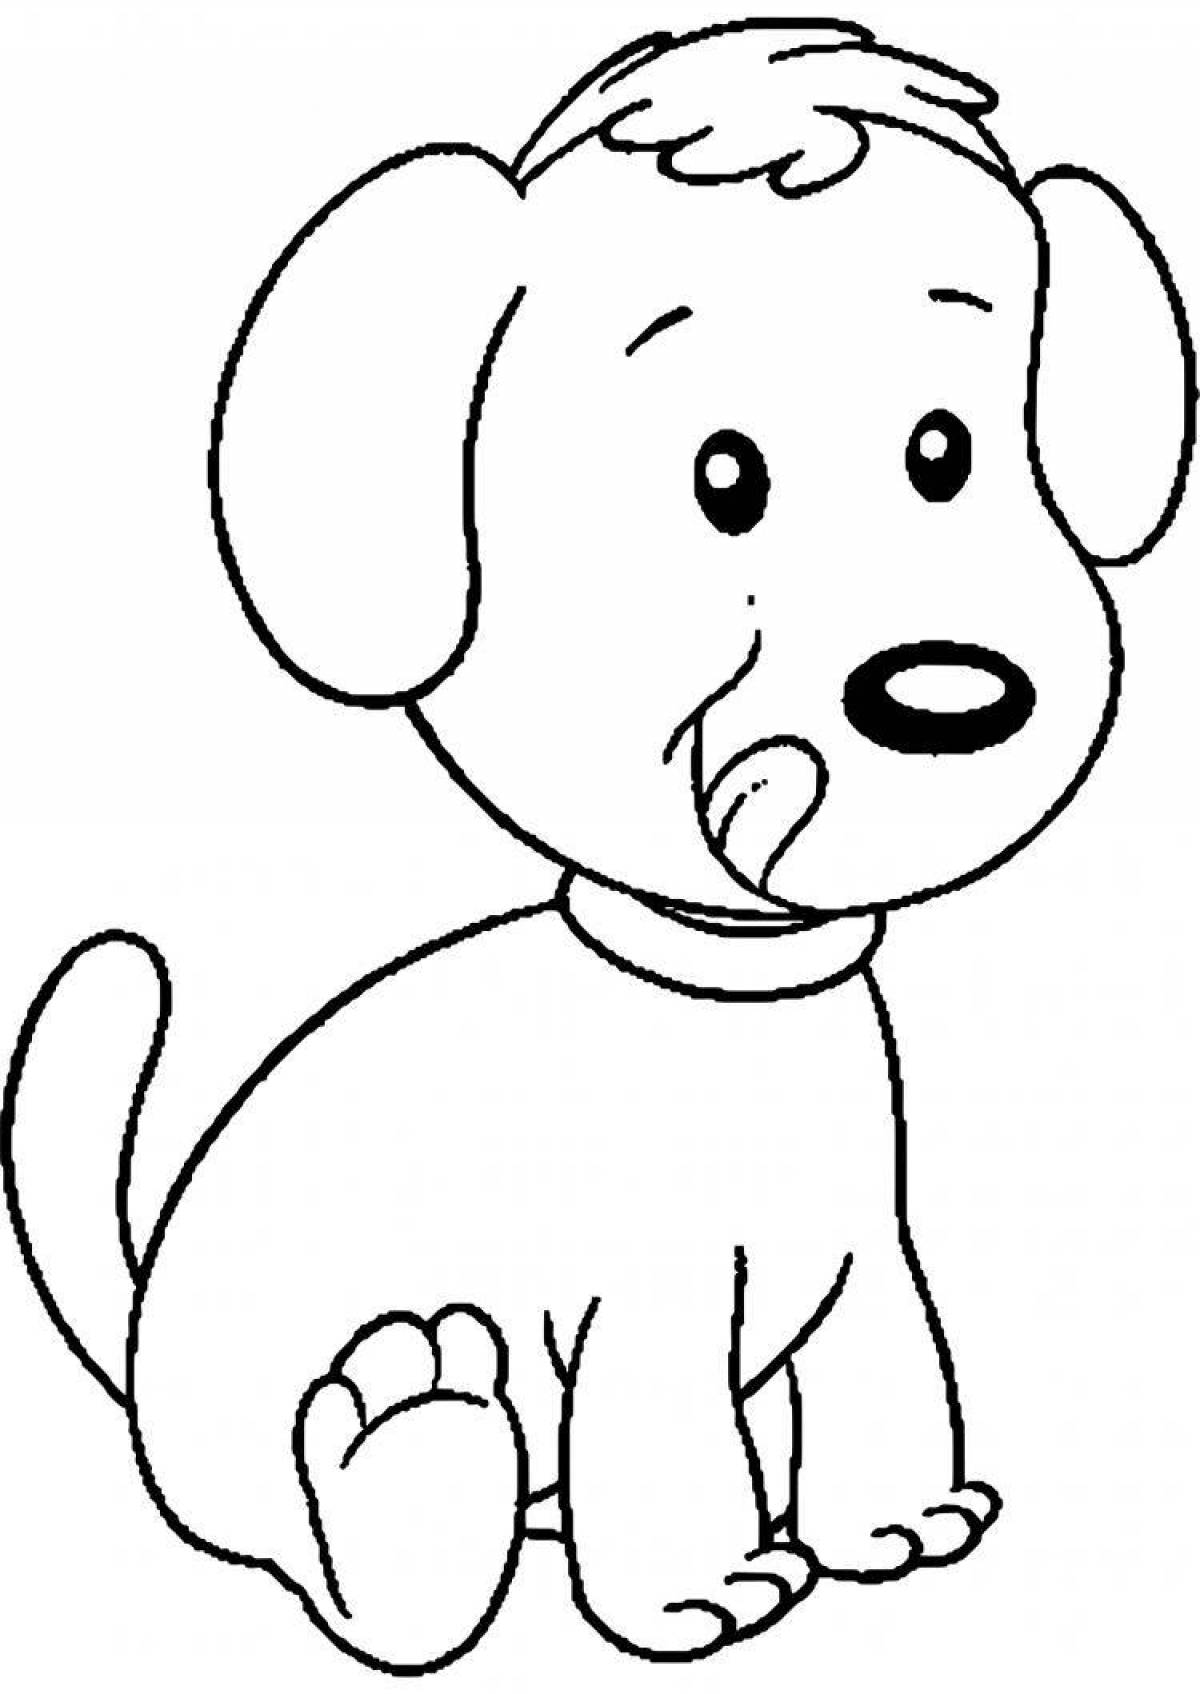 A fun dog coloring book for 3-4 year olds